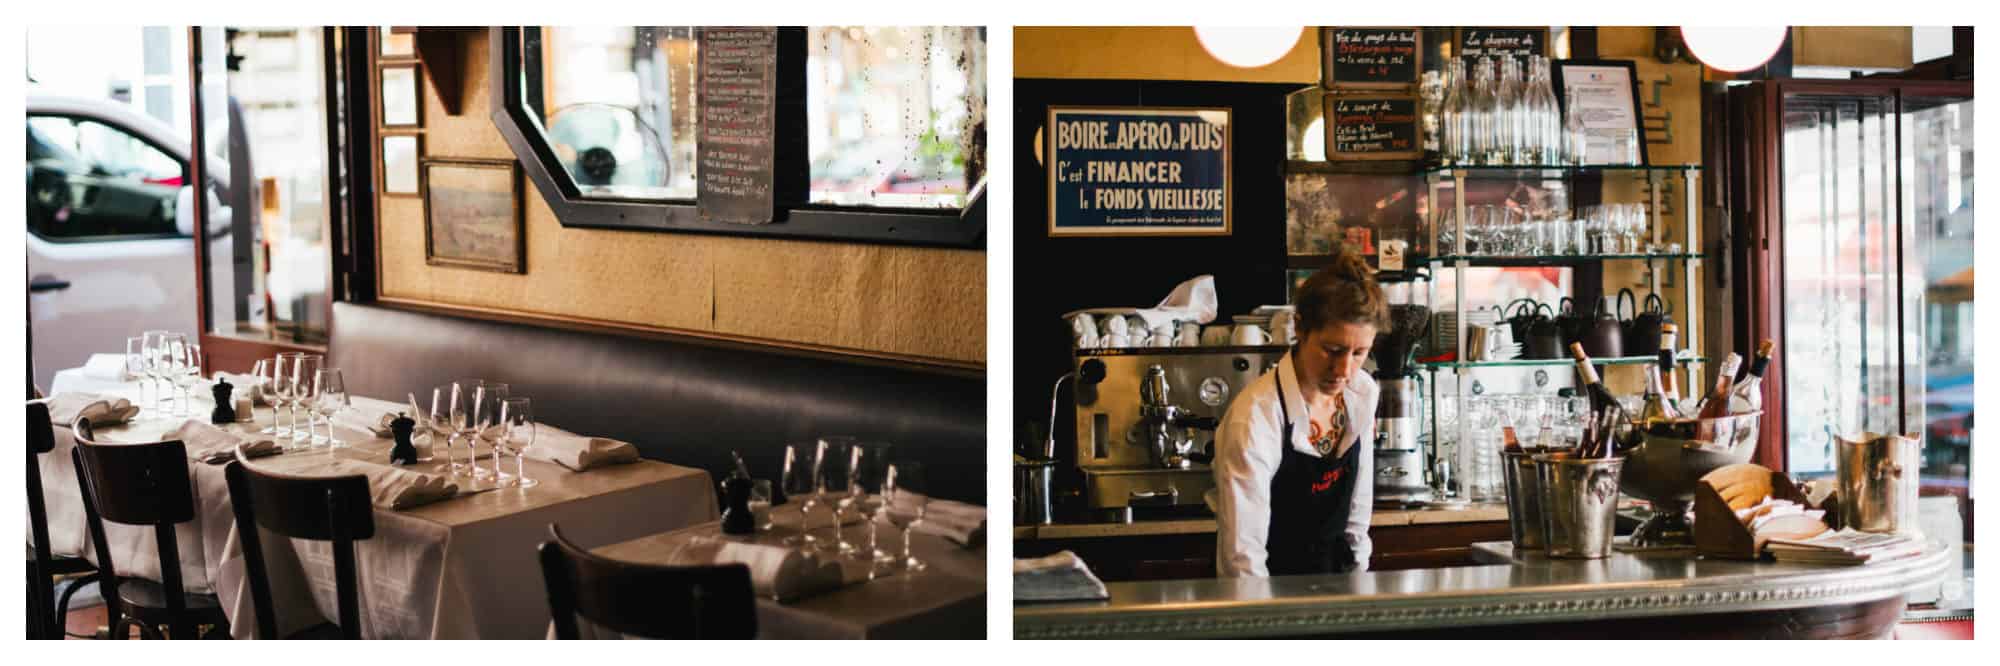 The tables and wooden bistrot chairs at Bistrot Paul Bert (left) and a waitress behind the counter (right).